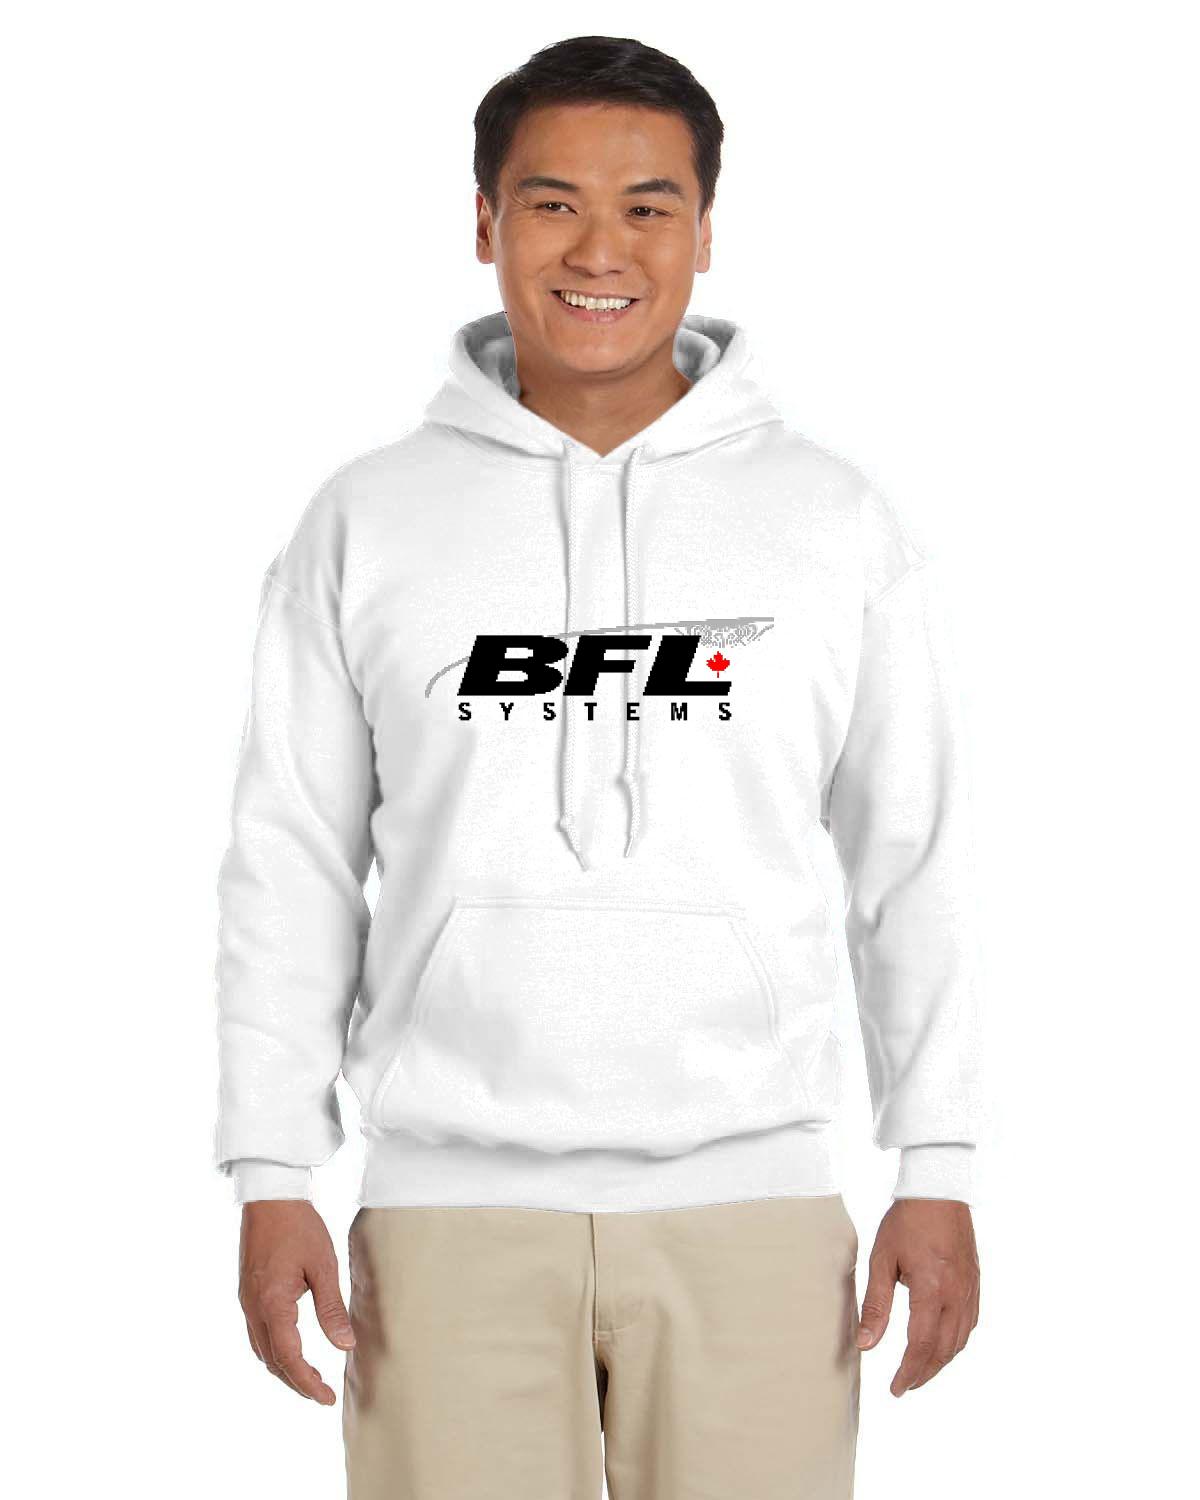 BFL Systems Adult Hoodie